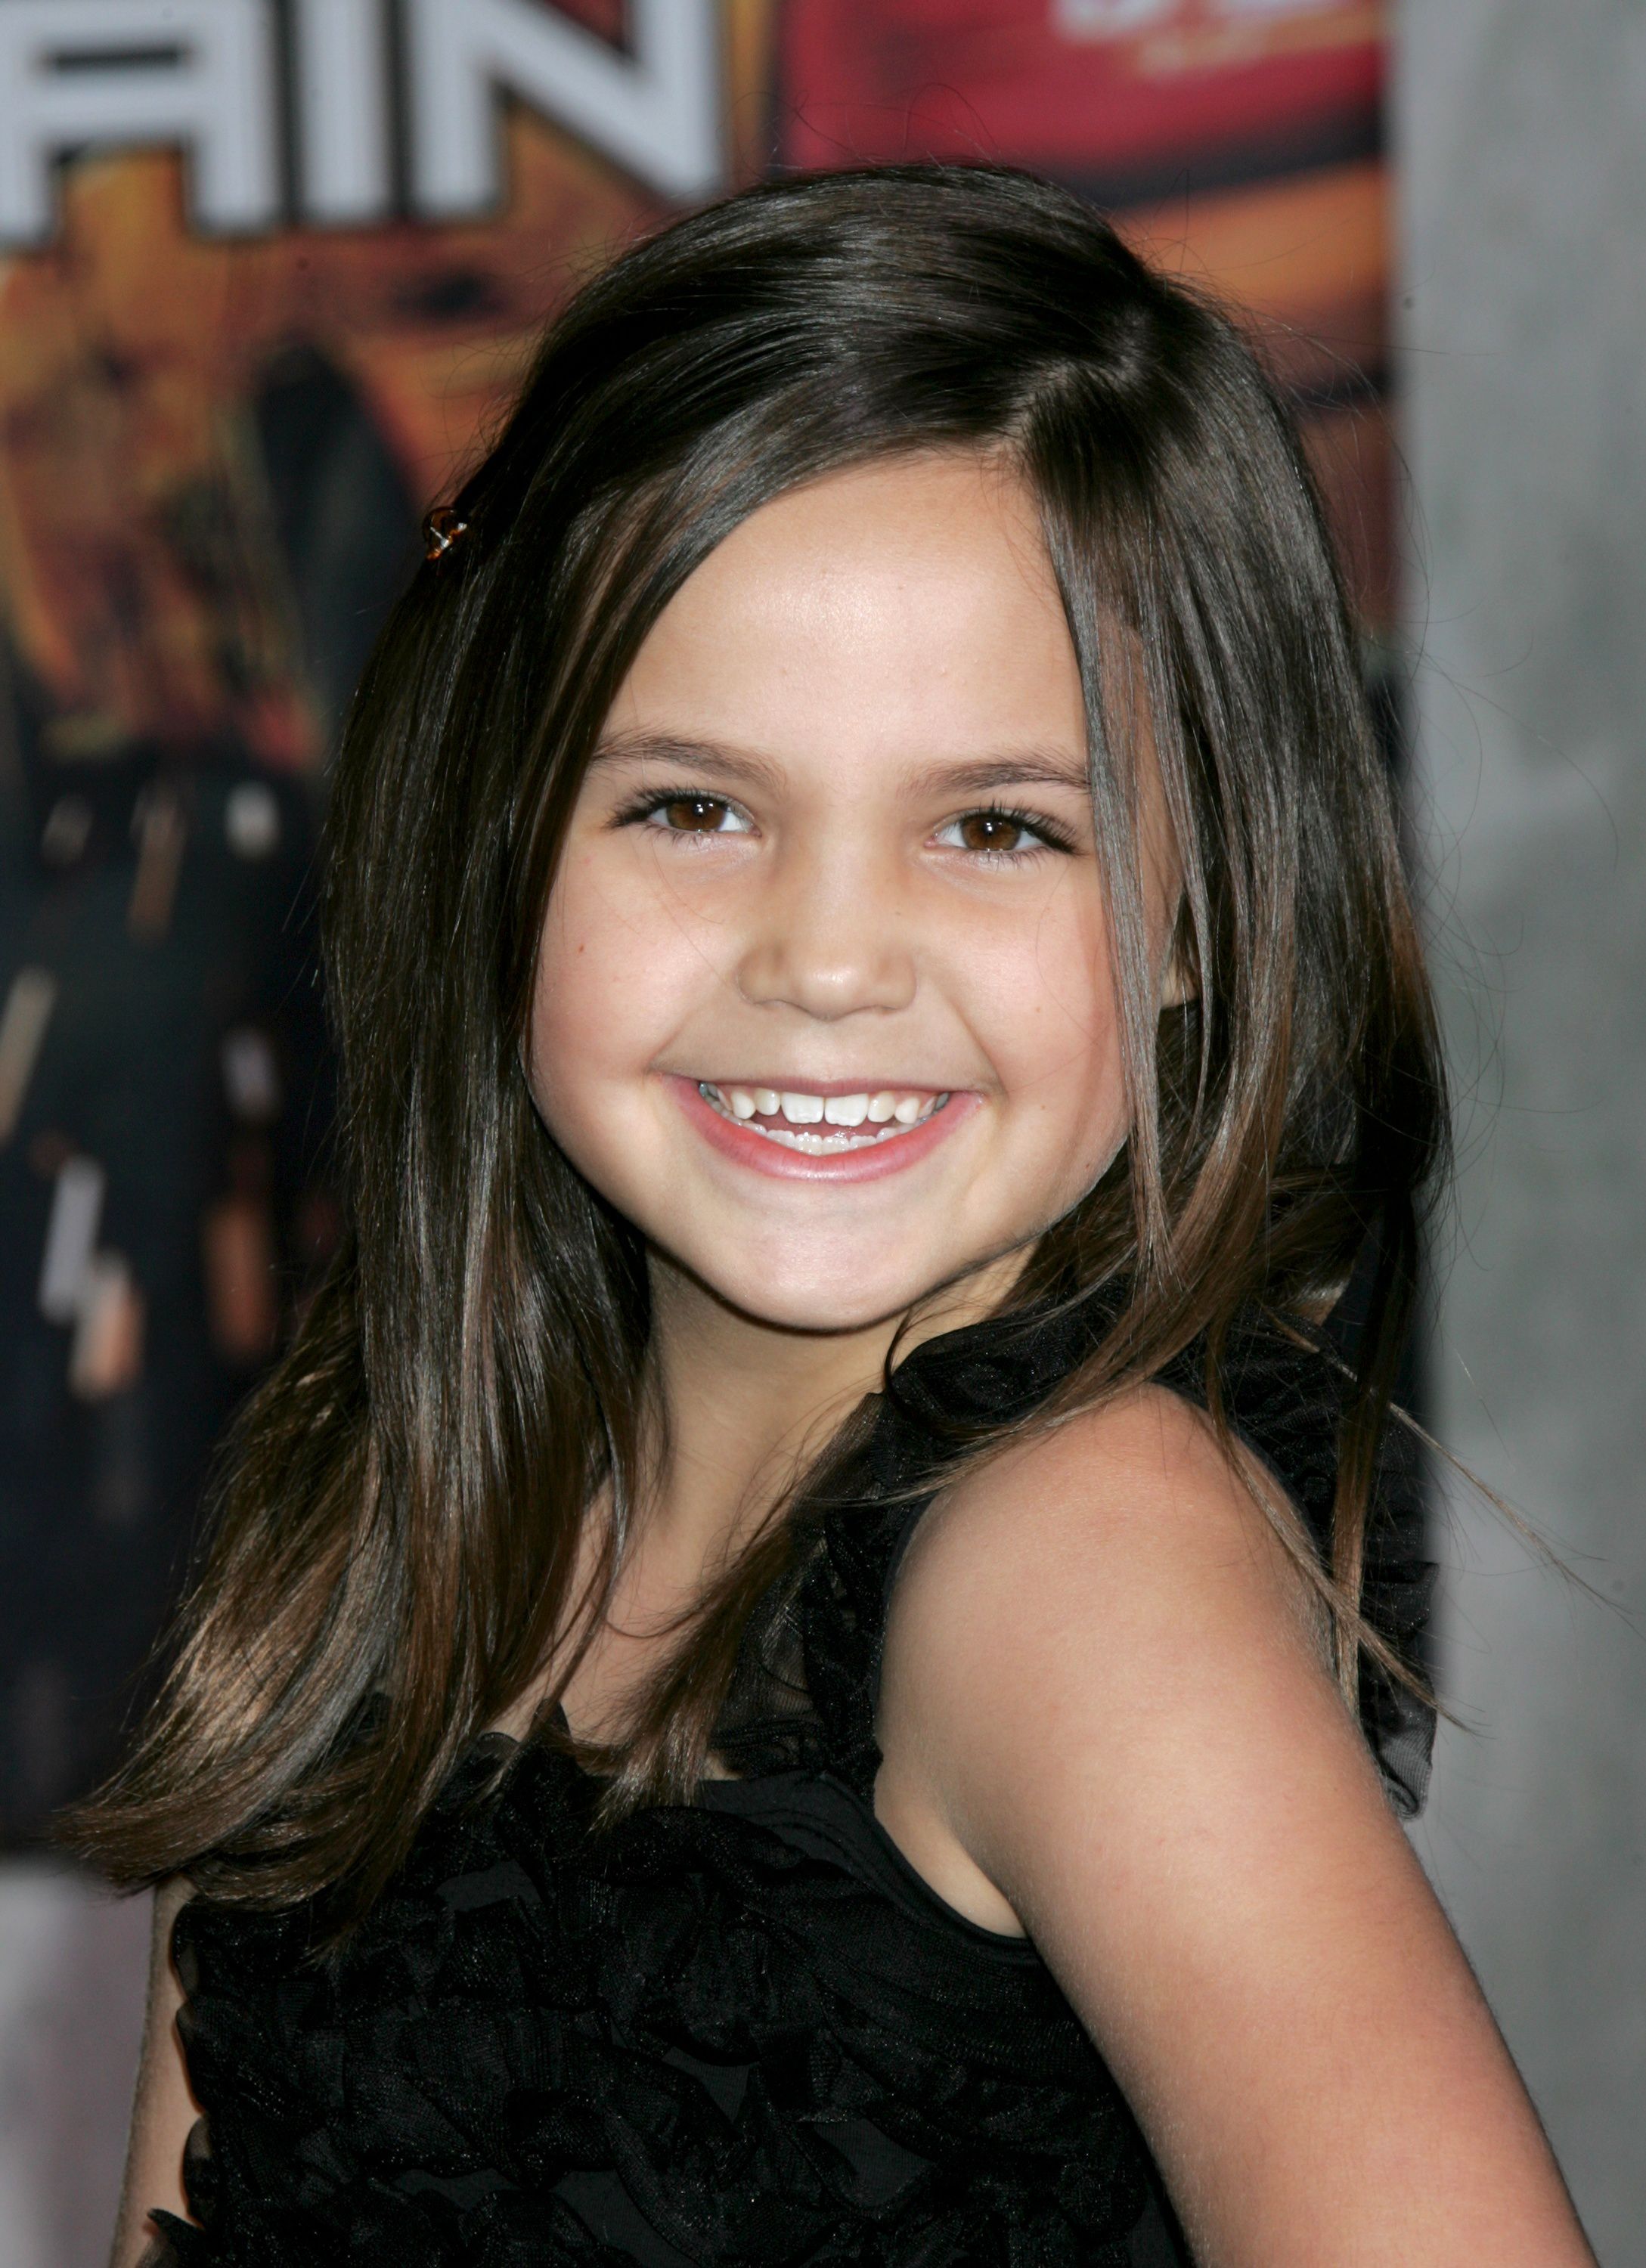 Bailee Madison's Transformation From Child Star to Adult Actress | J-14